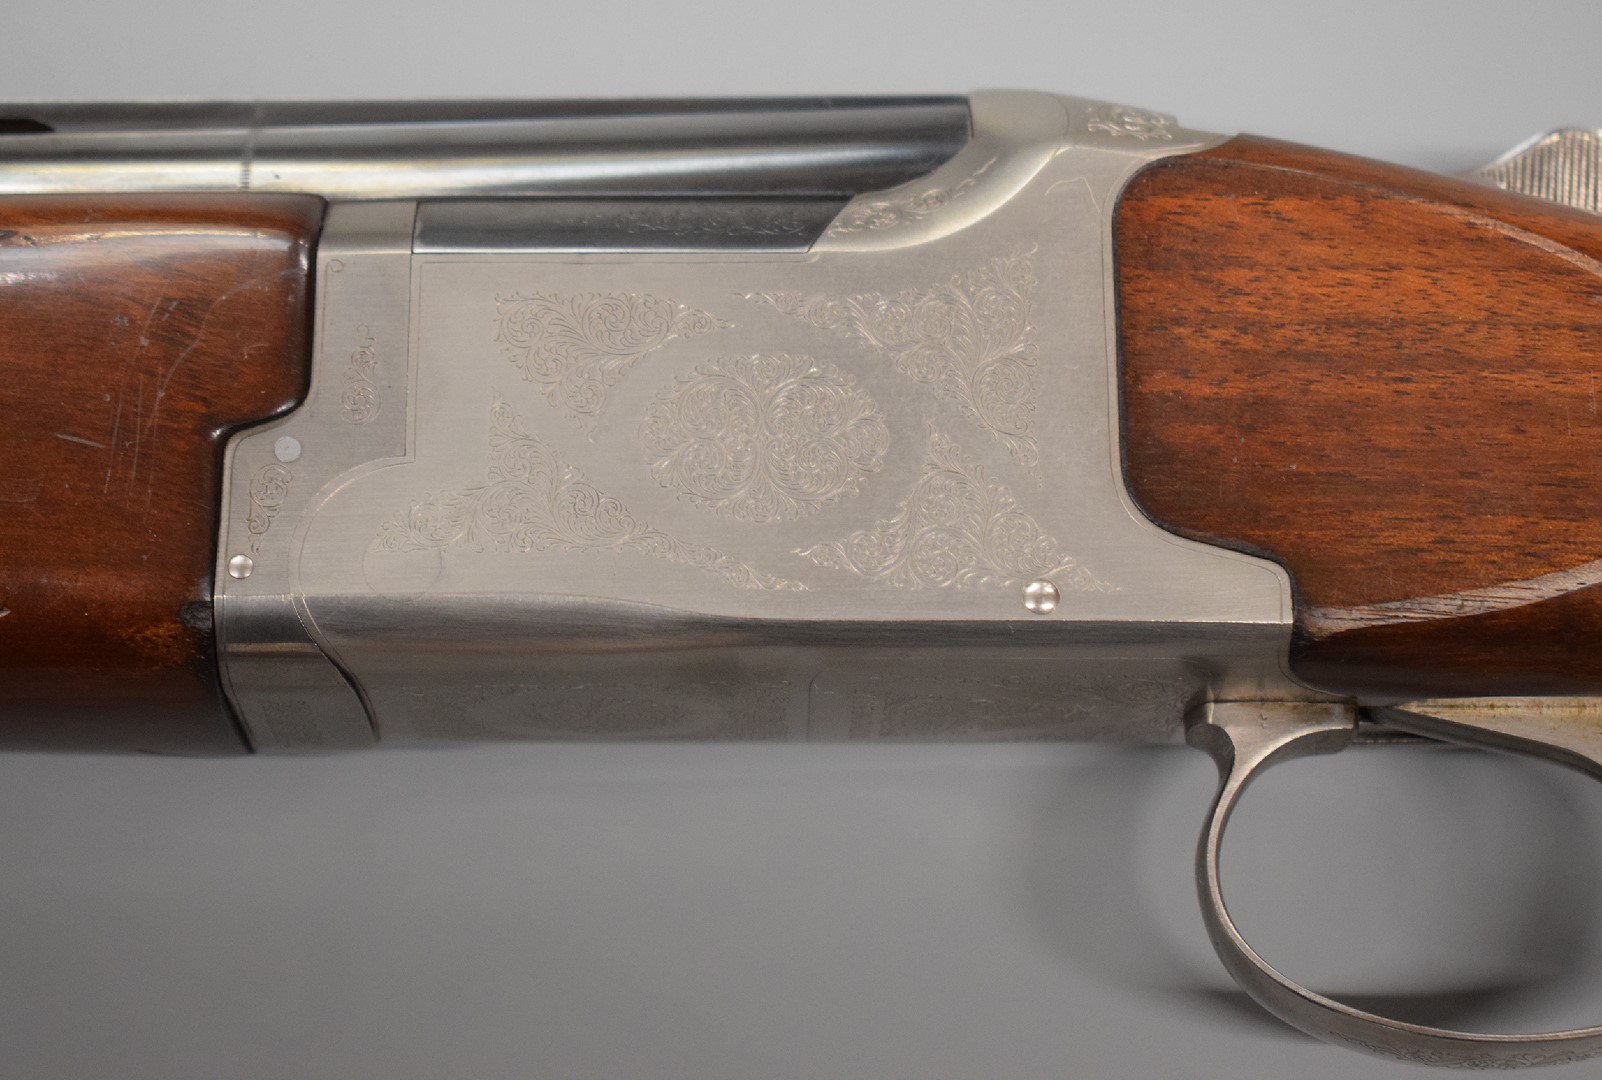 Winchester 5000 Field 12 bore over and under shotgun with engraved locks and trigger guard, single - Image 7 of 8